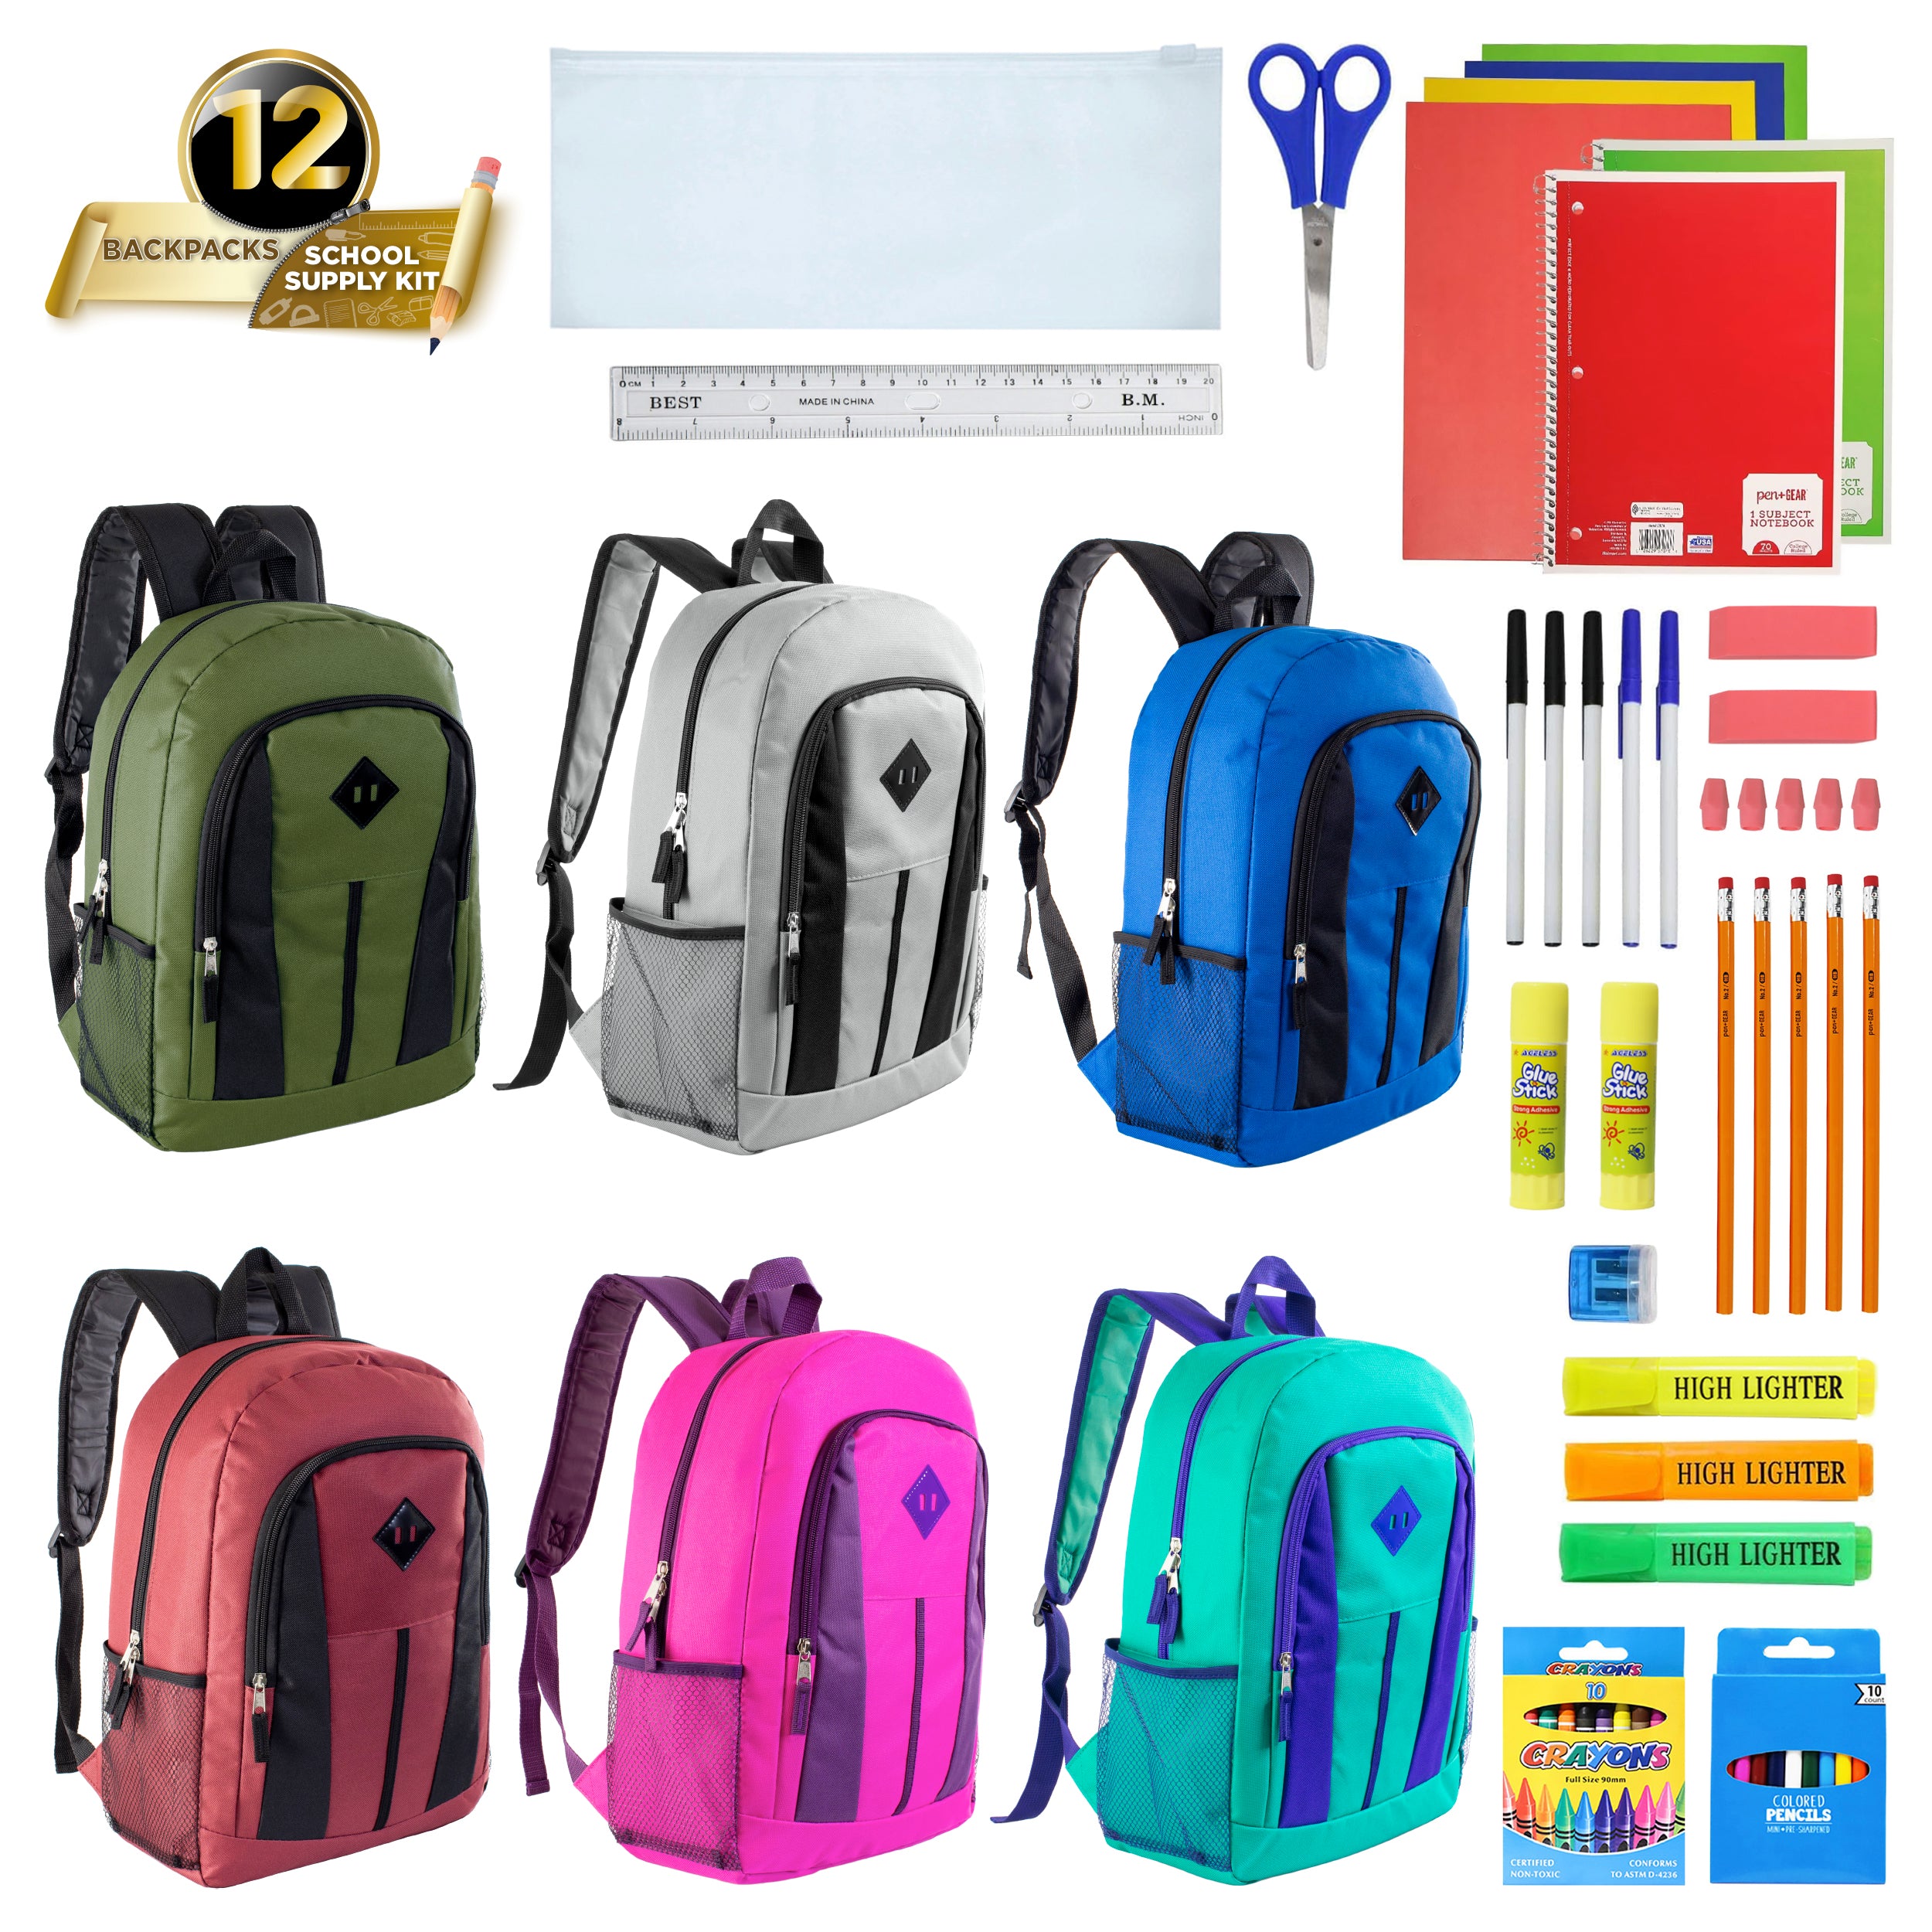 12 Wholesale 17" Diamond Patch Backpacks in 6 Colors & 12 Bulk School Supply Kits of Your Choice